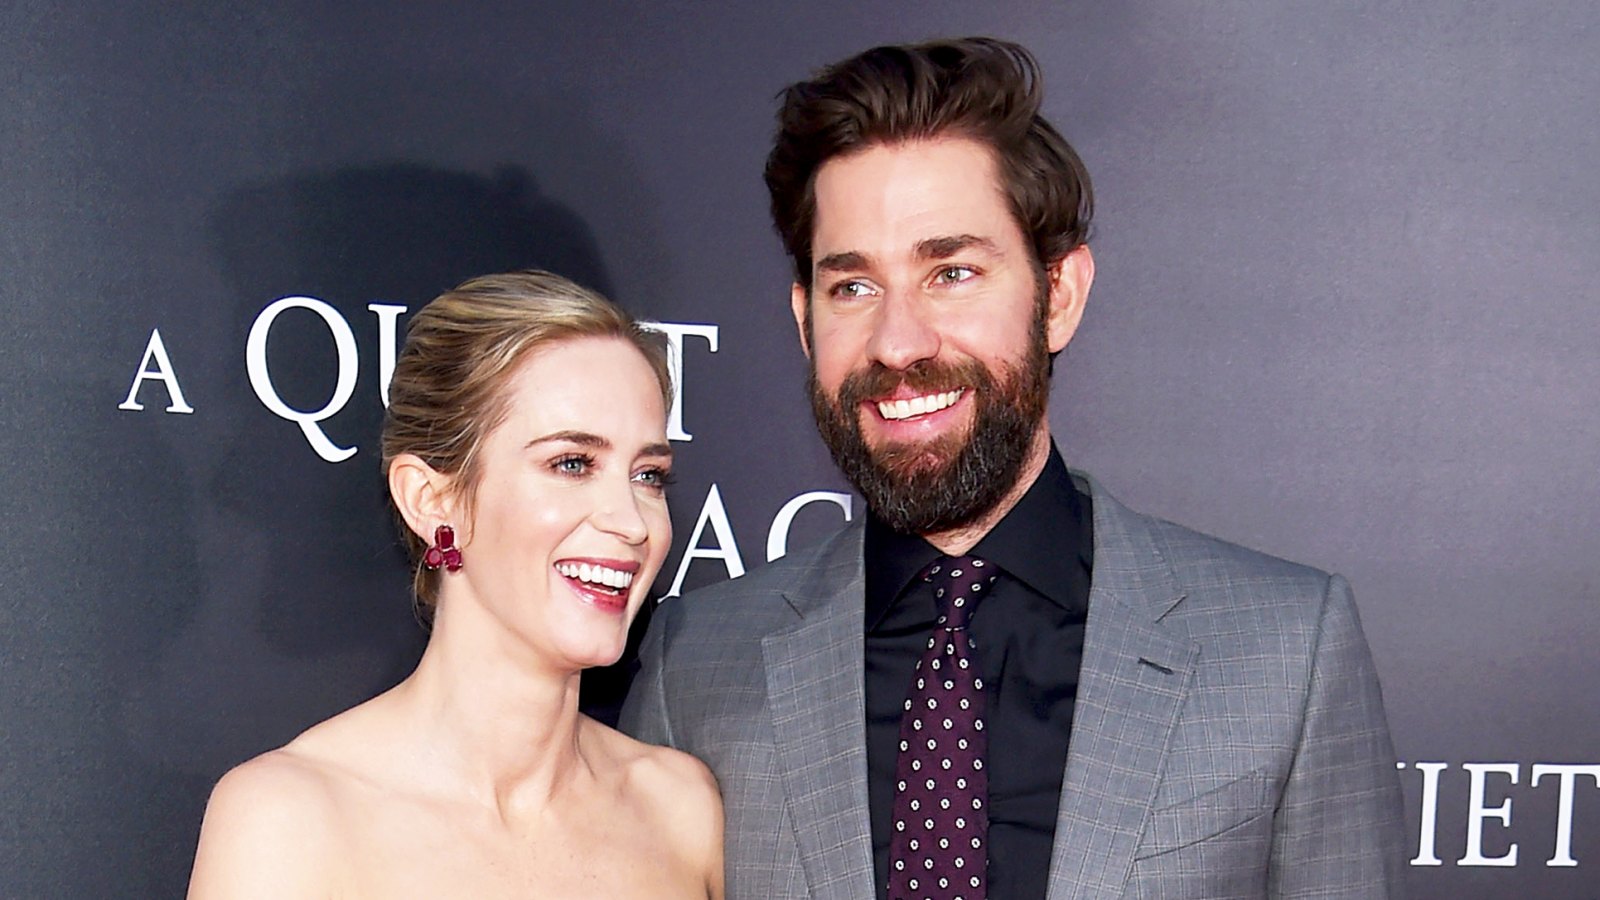 Emily Blunt and John Krasinski attend the premiere for "A Quiet Place" at AMC Lincoln Square Theater on April 2, 2018 in New York City.